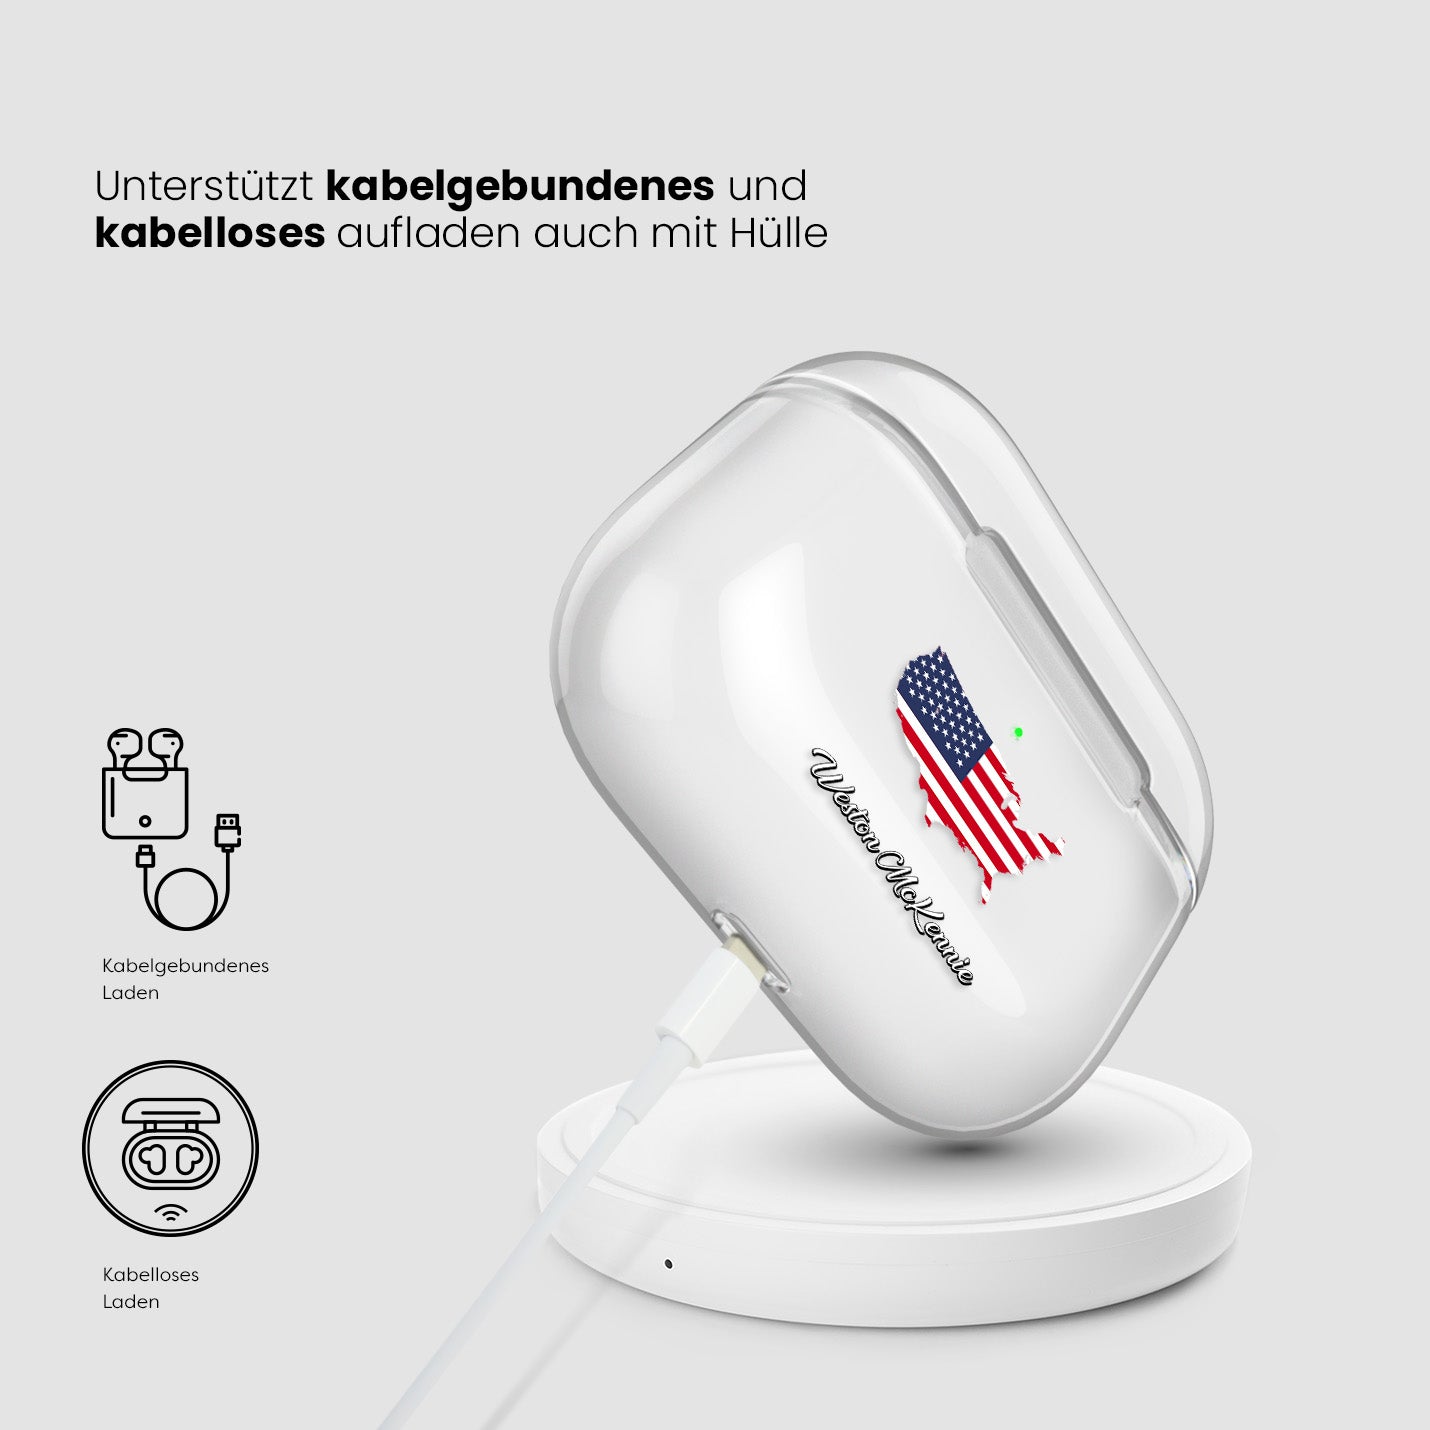 Airpods Hülle - United States of America ( USA ) Flagge - 1instaphone